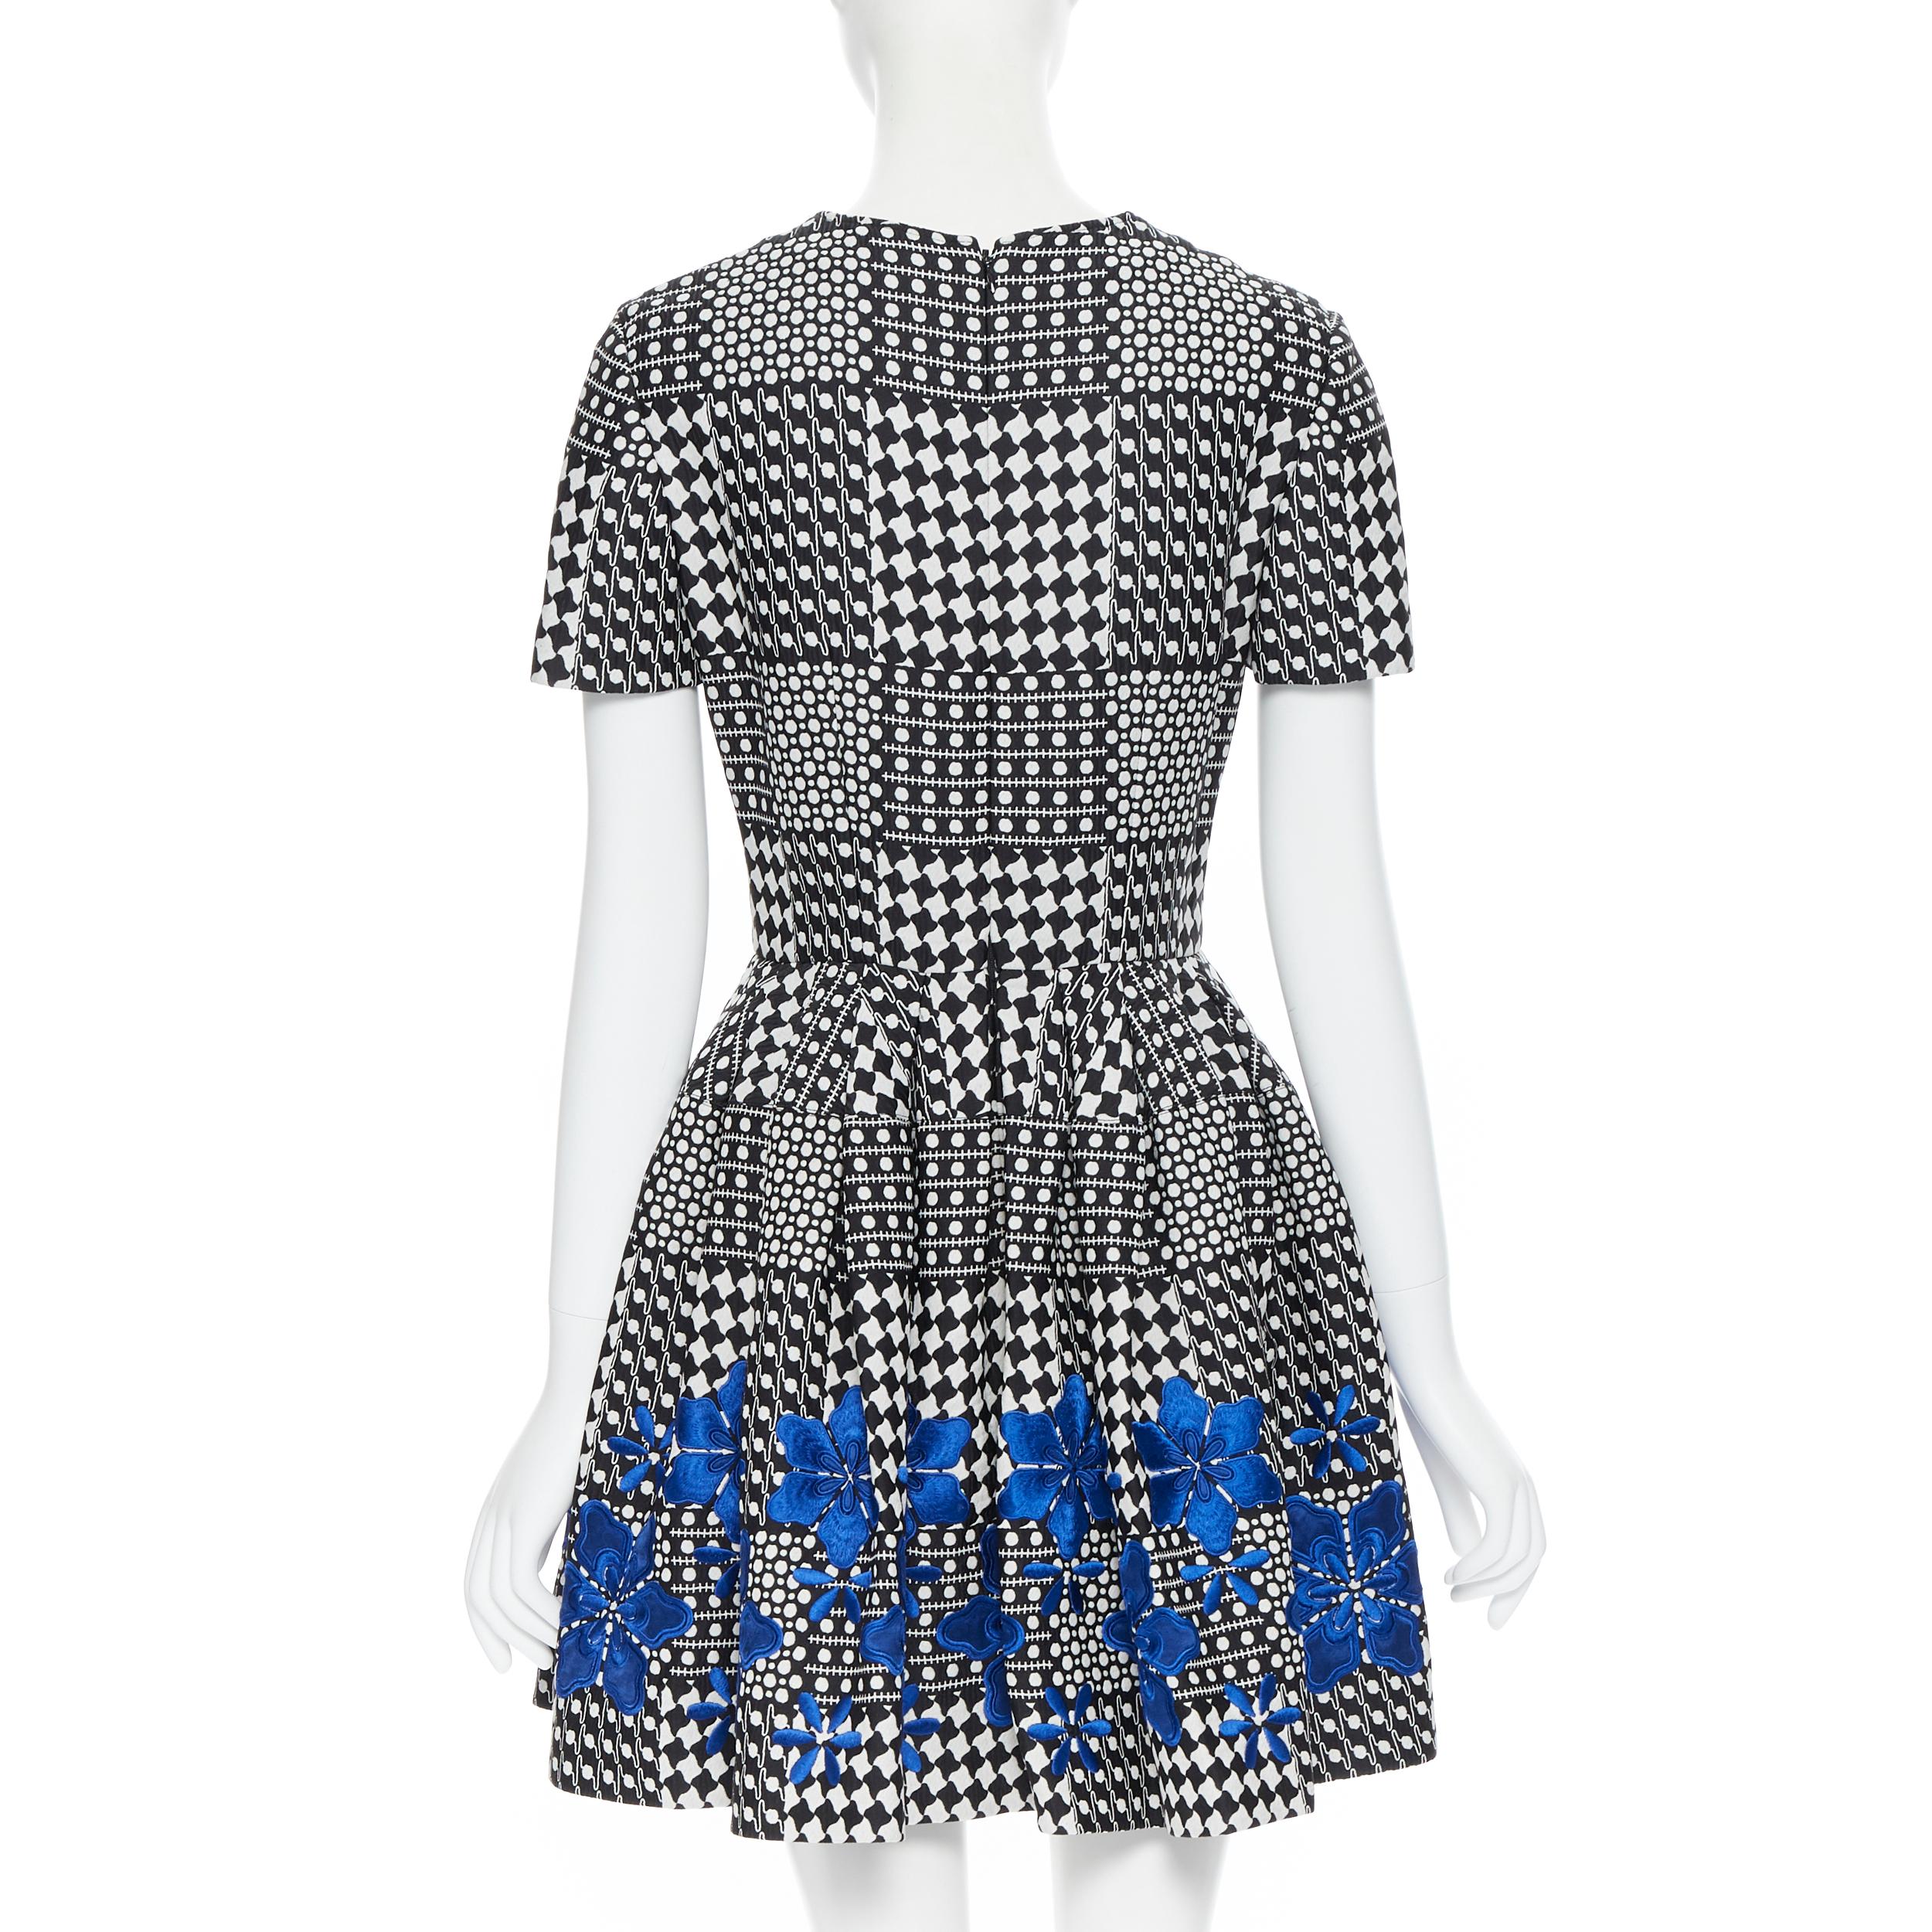 Black ALEXANDER MCQUEEN black white geometric blue floral embroidery fit flare dress S